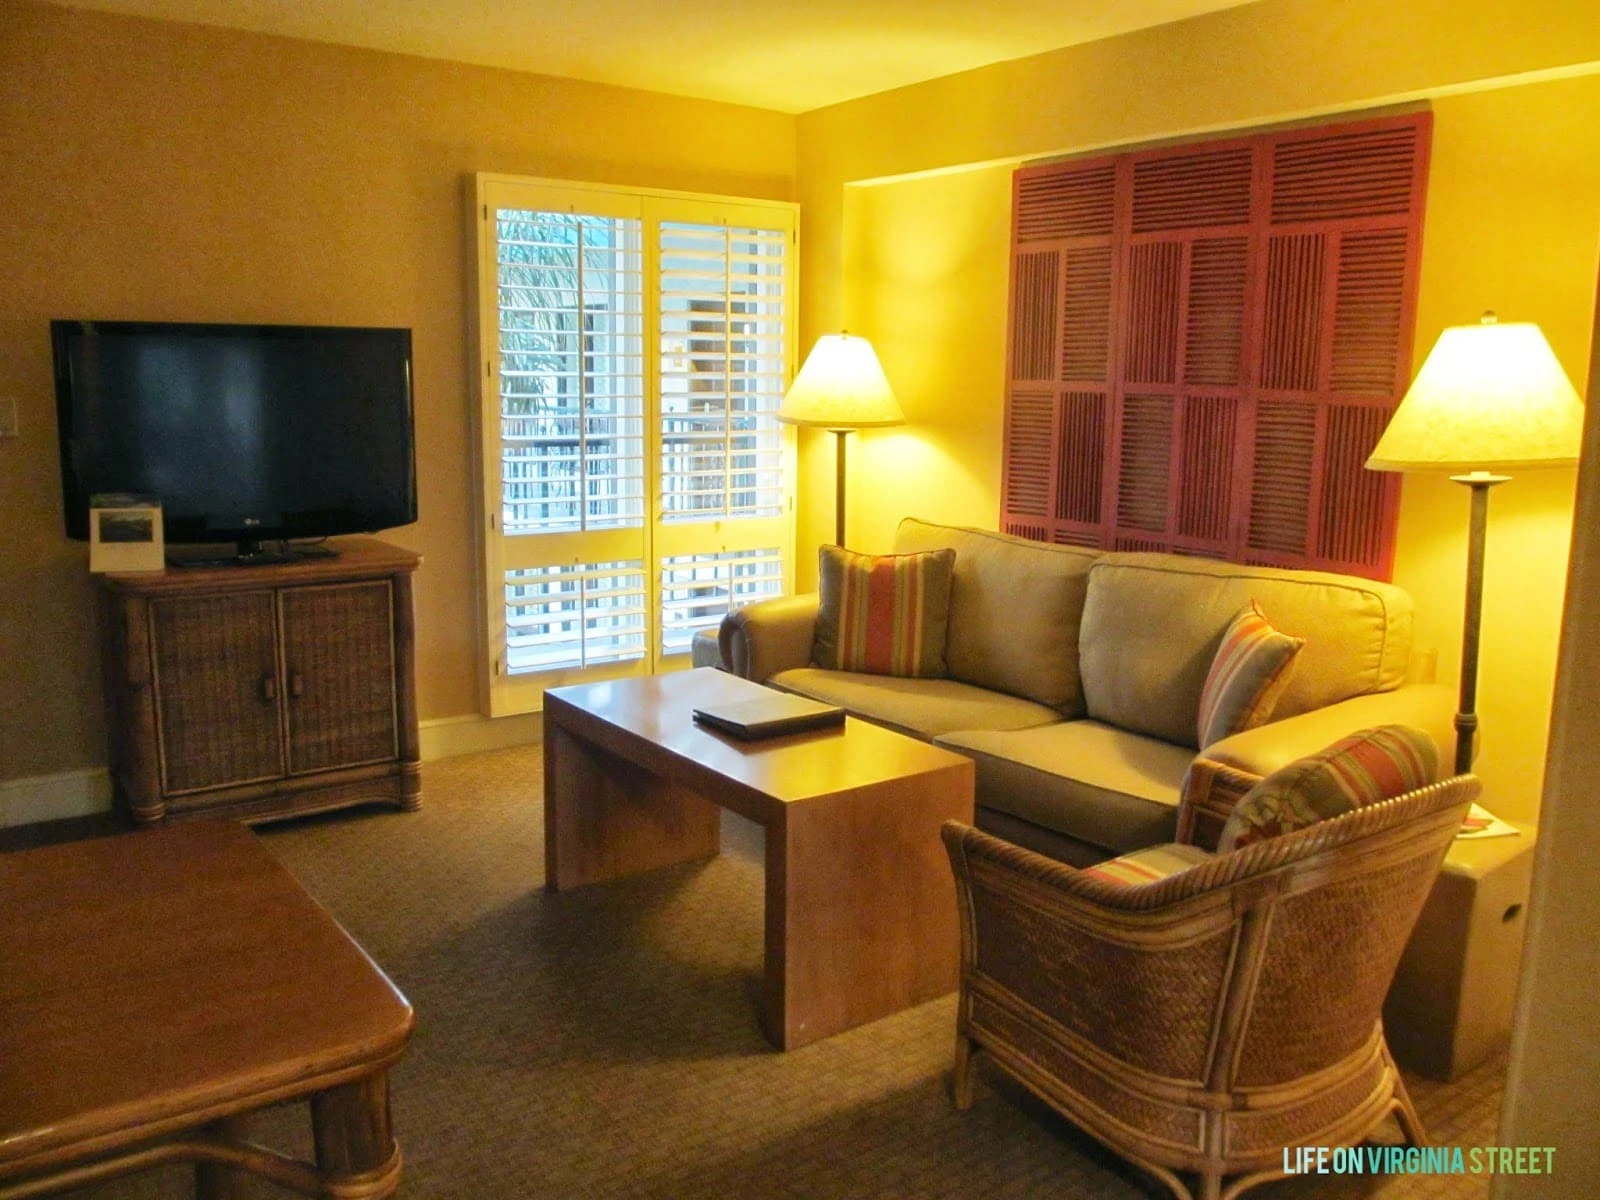 A small sitting room inside the hotel room.